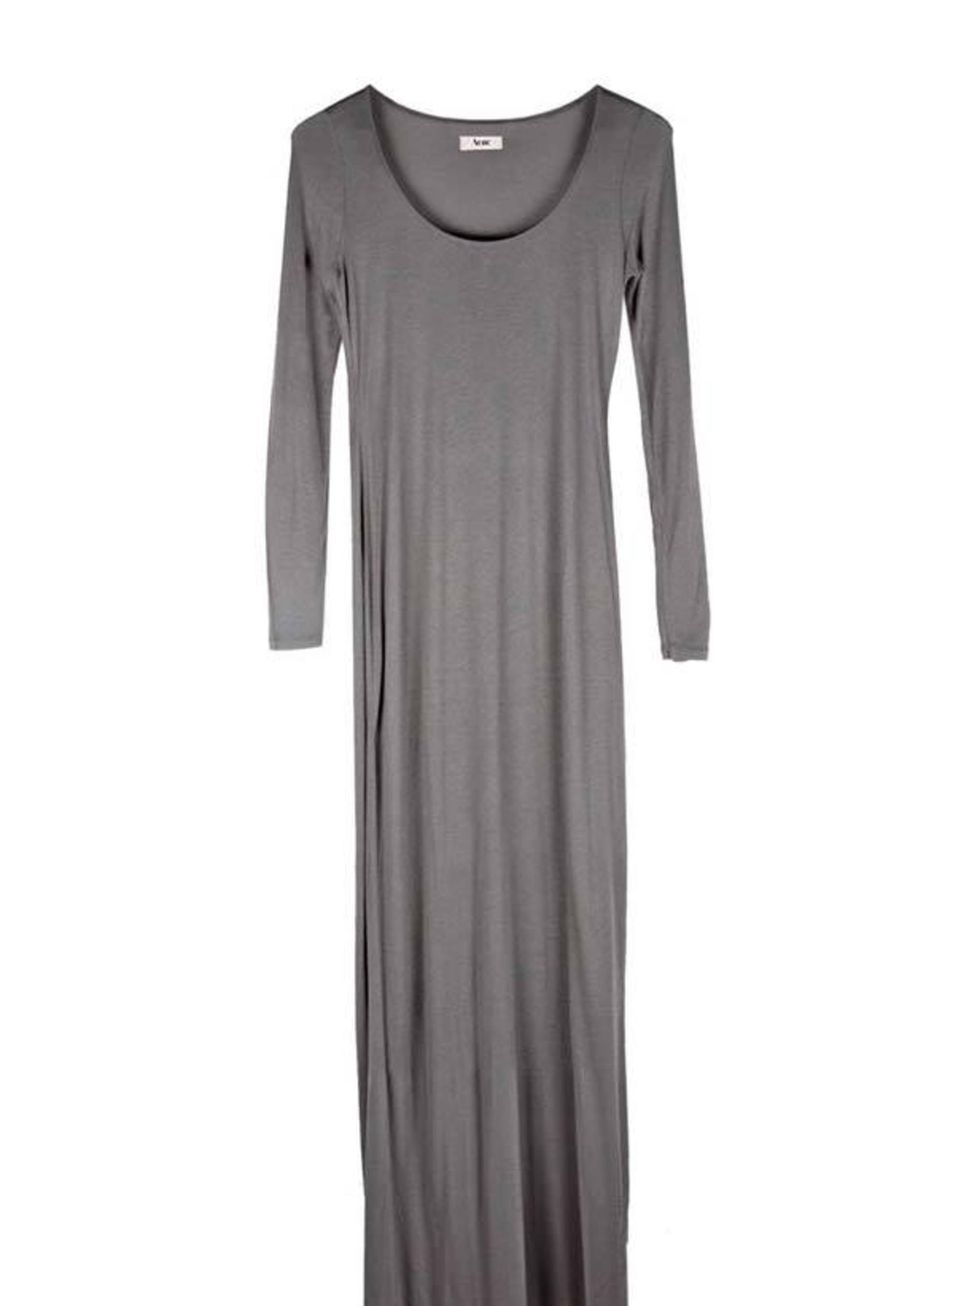 <p>The maxi trend is set to continue into next season but for now this luxe jersey dress by Acne chicly combines comfort and style for the office or weekend. Acne maxi dress, £110, at <a href="http://www.start-london.com/shop/womens-c-3.html?manufacturers